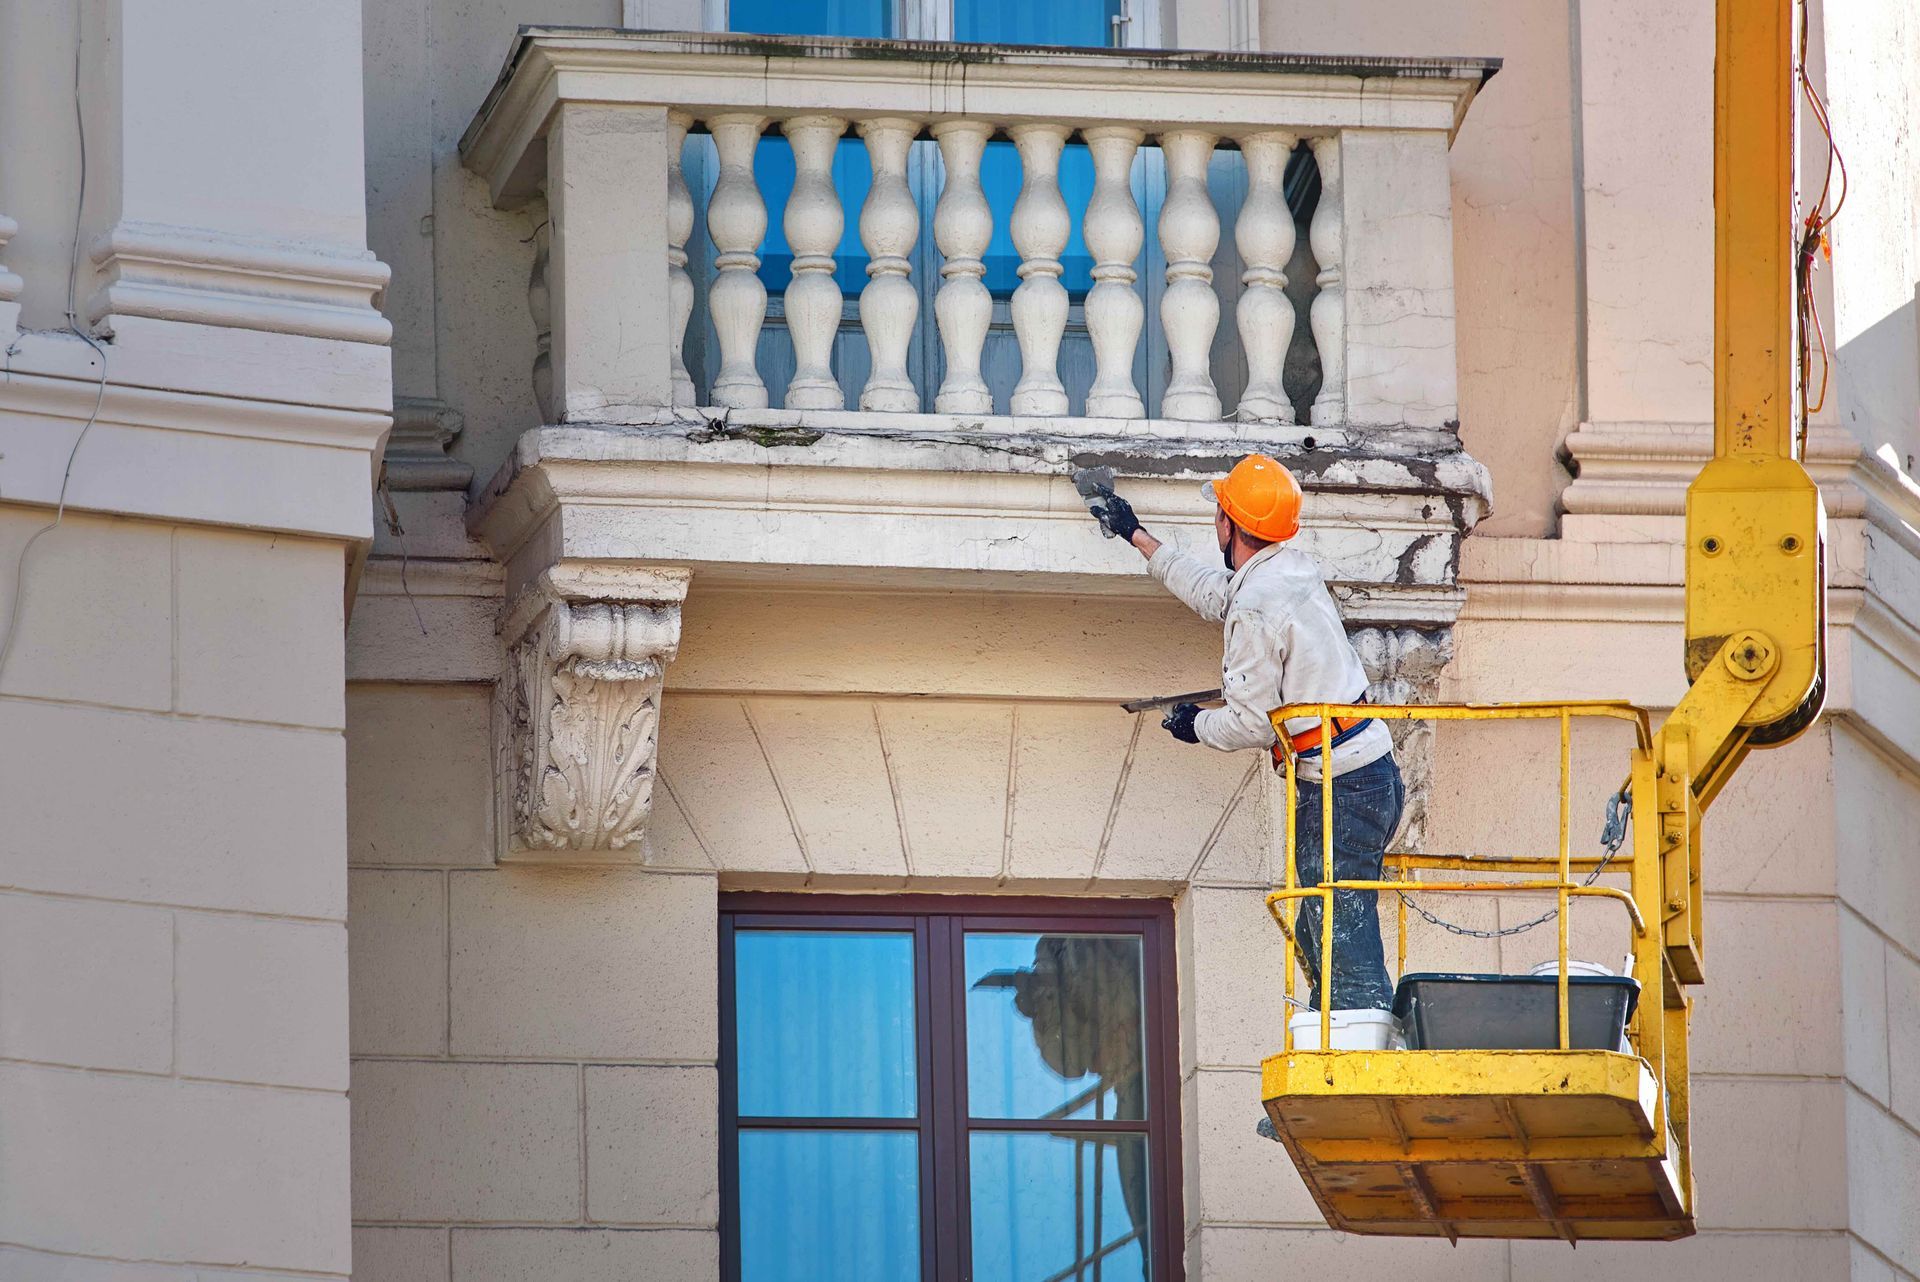 A man is painting a balcony on a building.